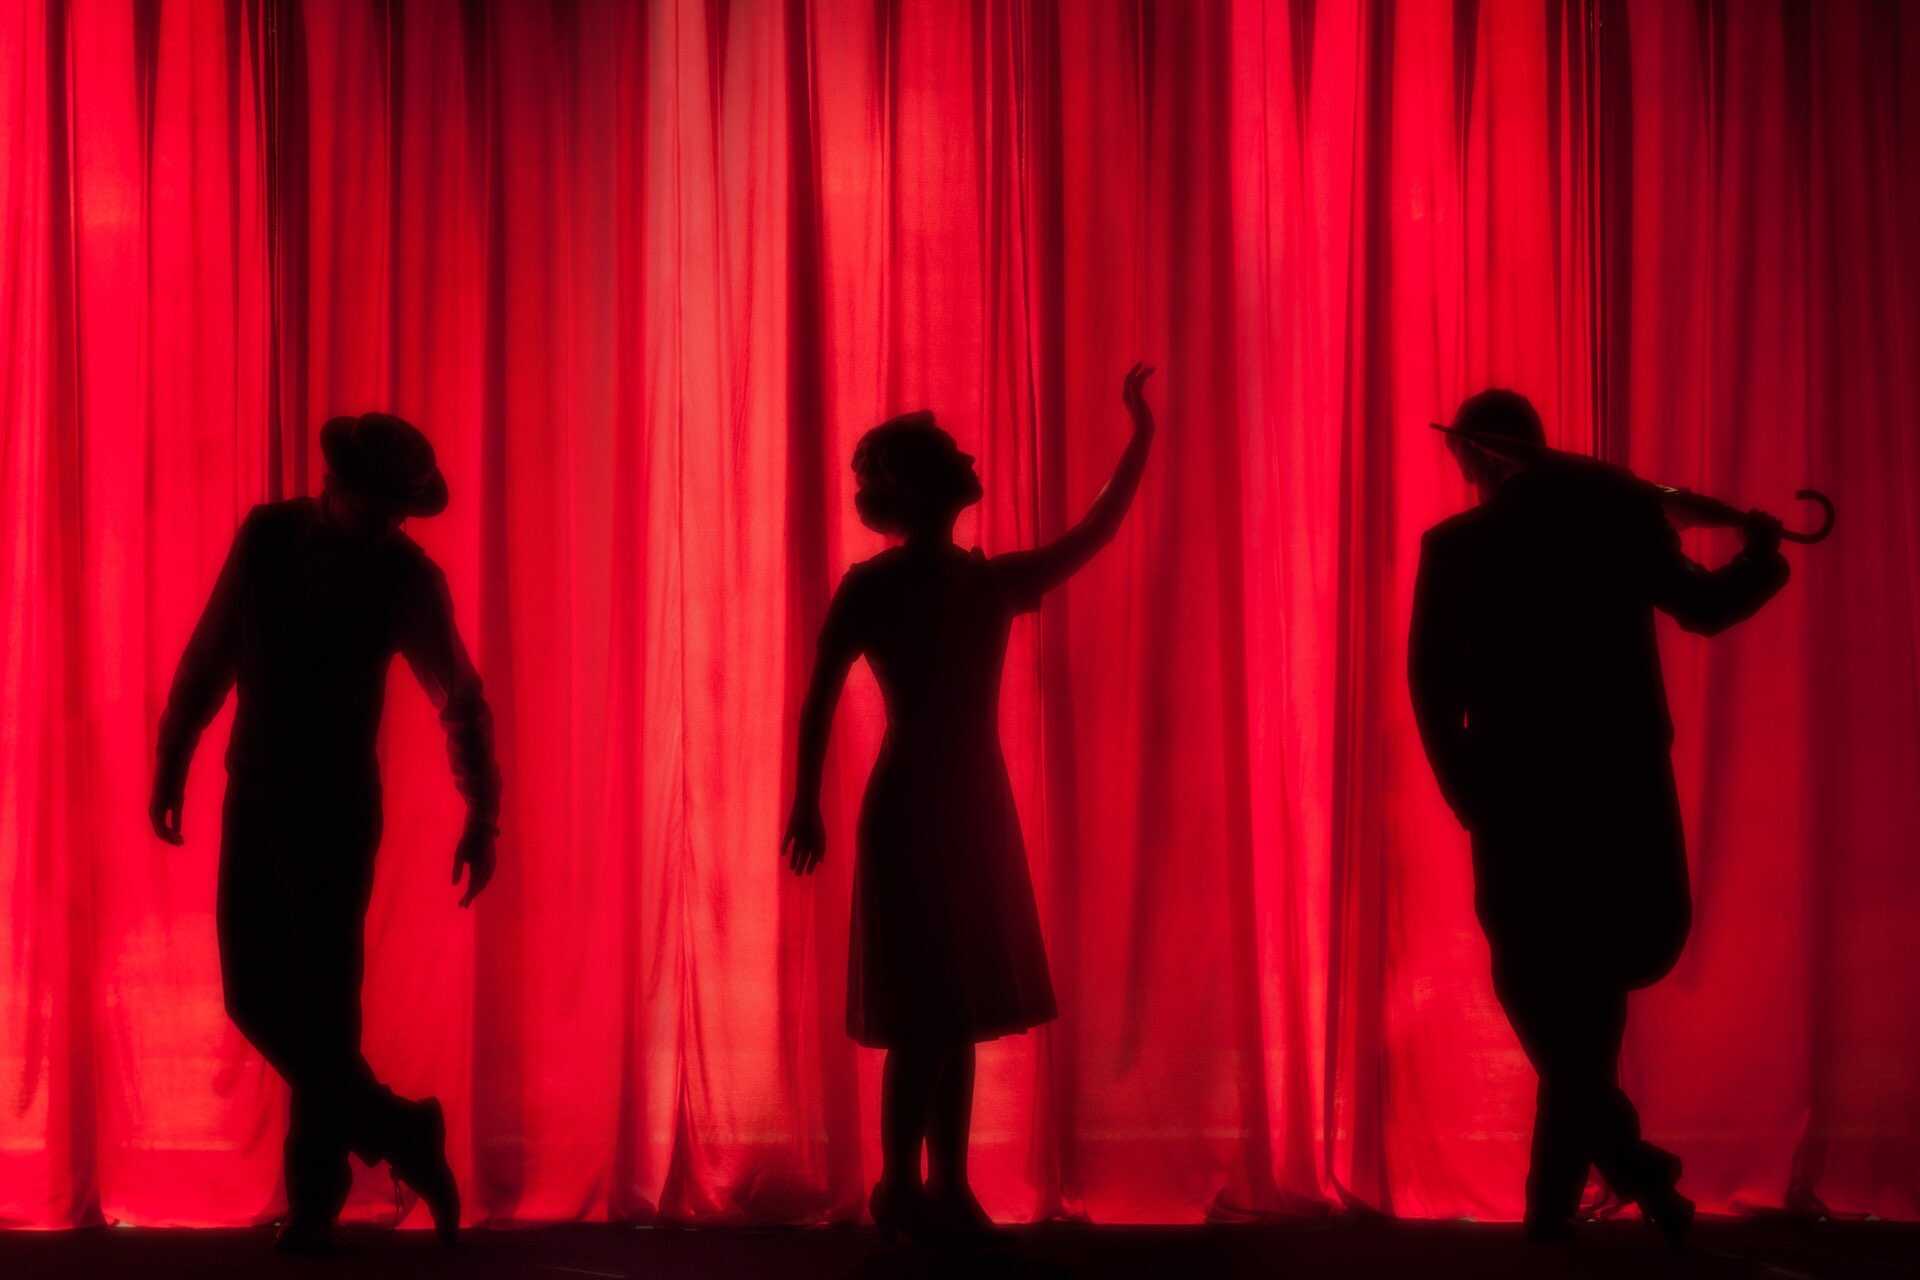 silhouettes of three people against a red curtain